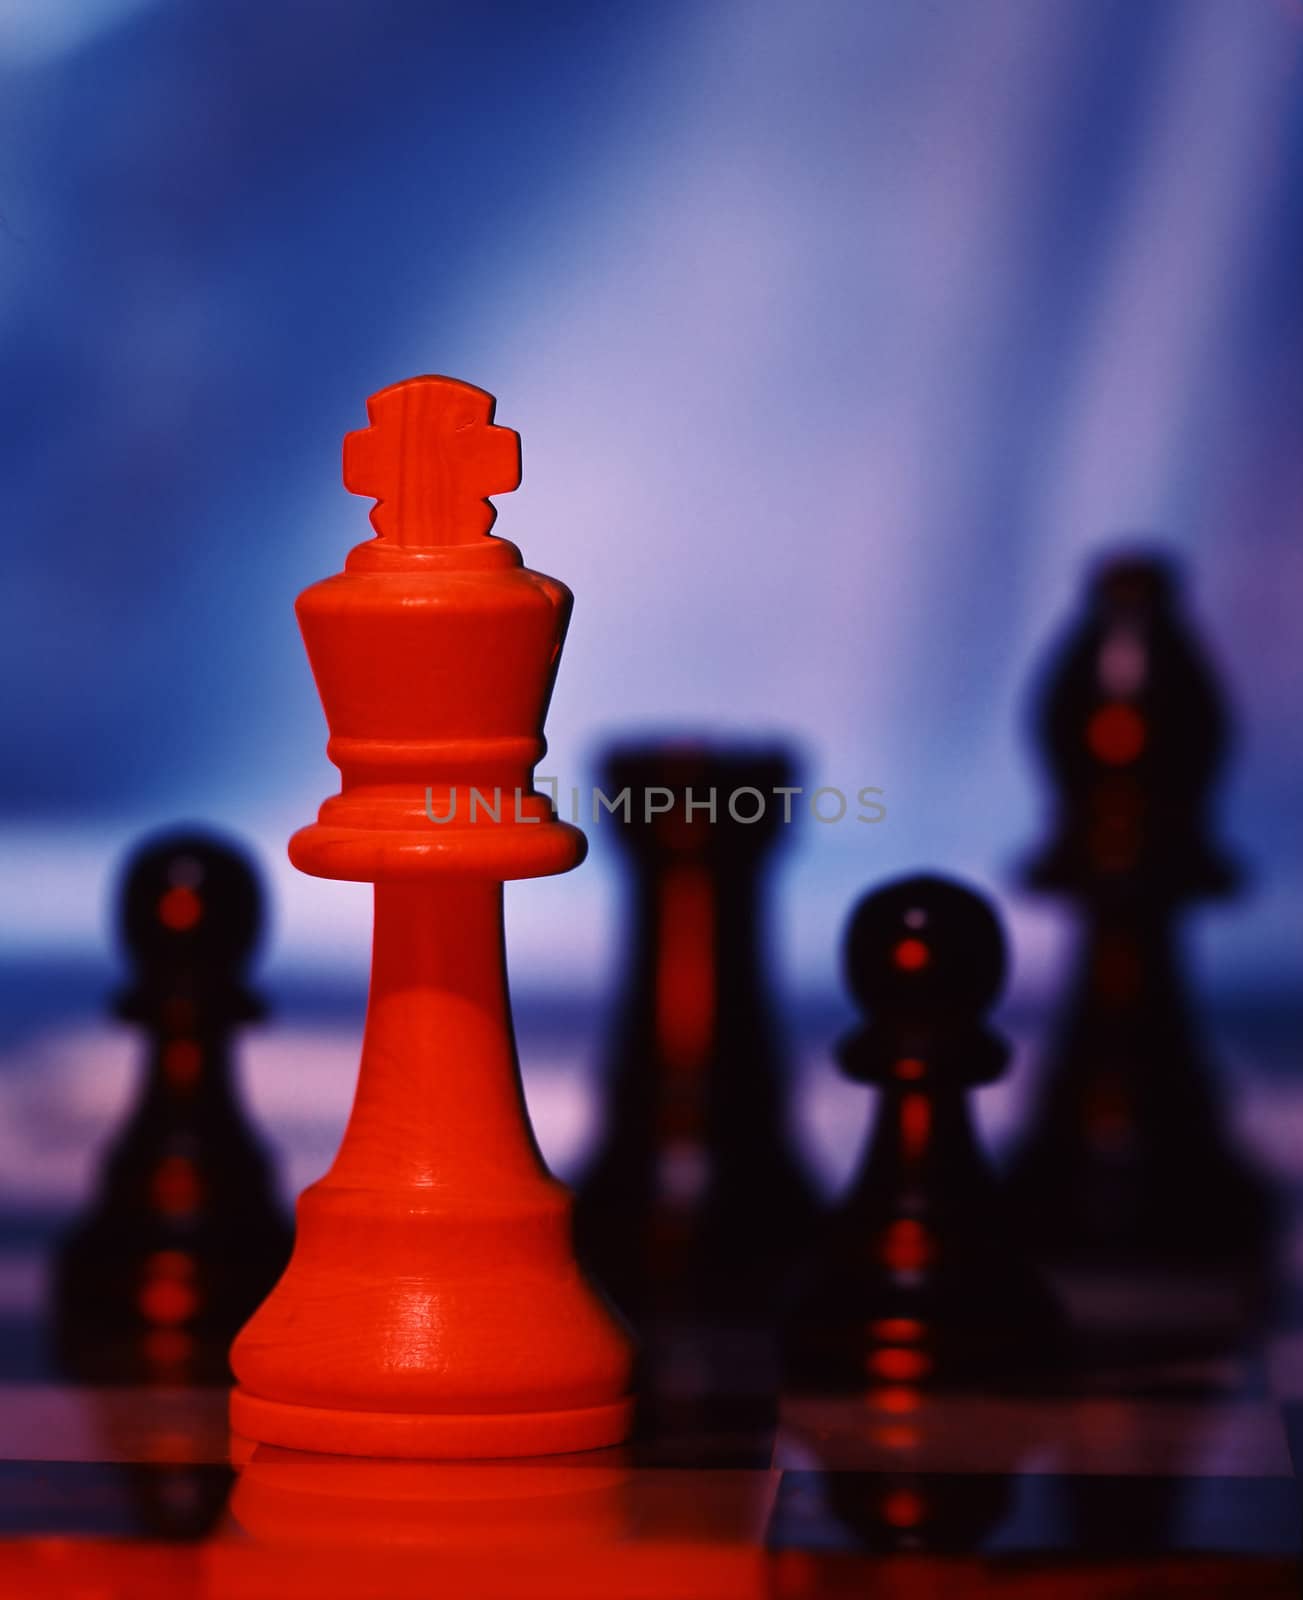 Chess pieces by f/2sumicron